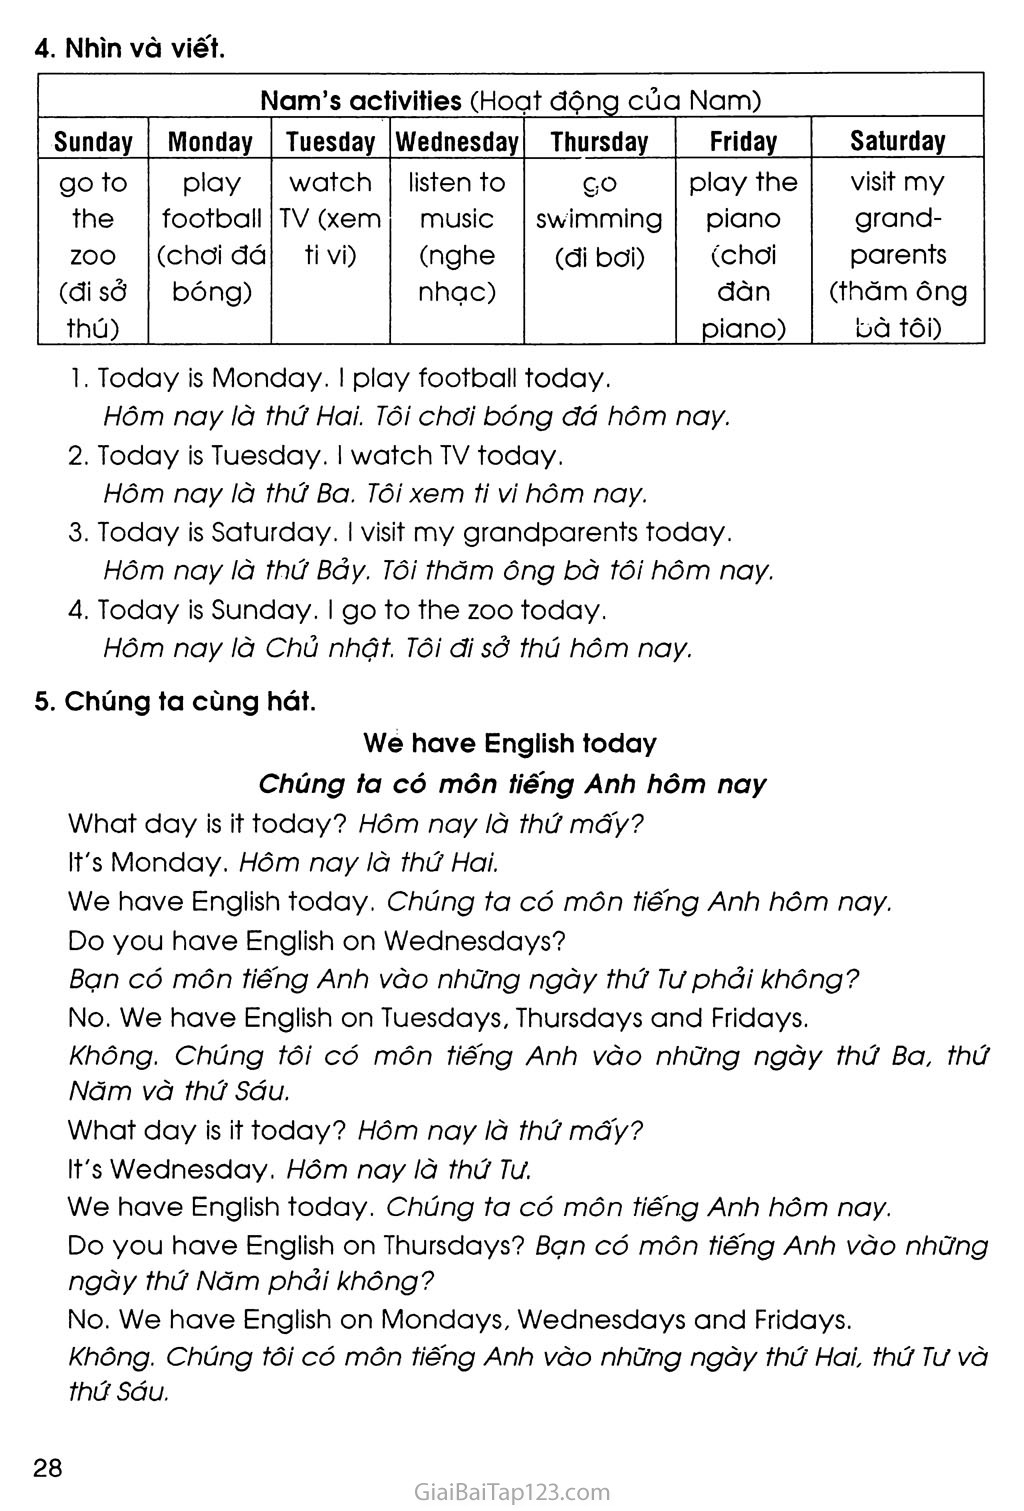 UNIT 3: WHAT DAY IS IT TODAY? trang 6